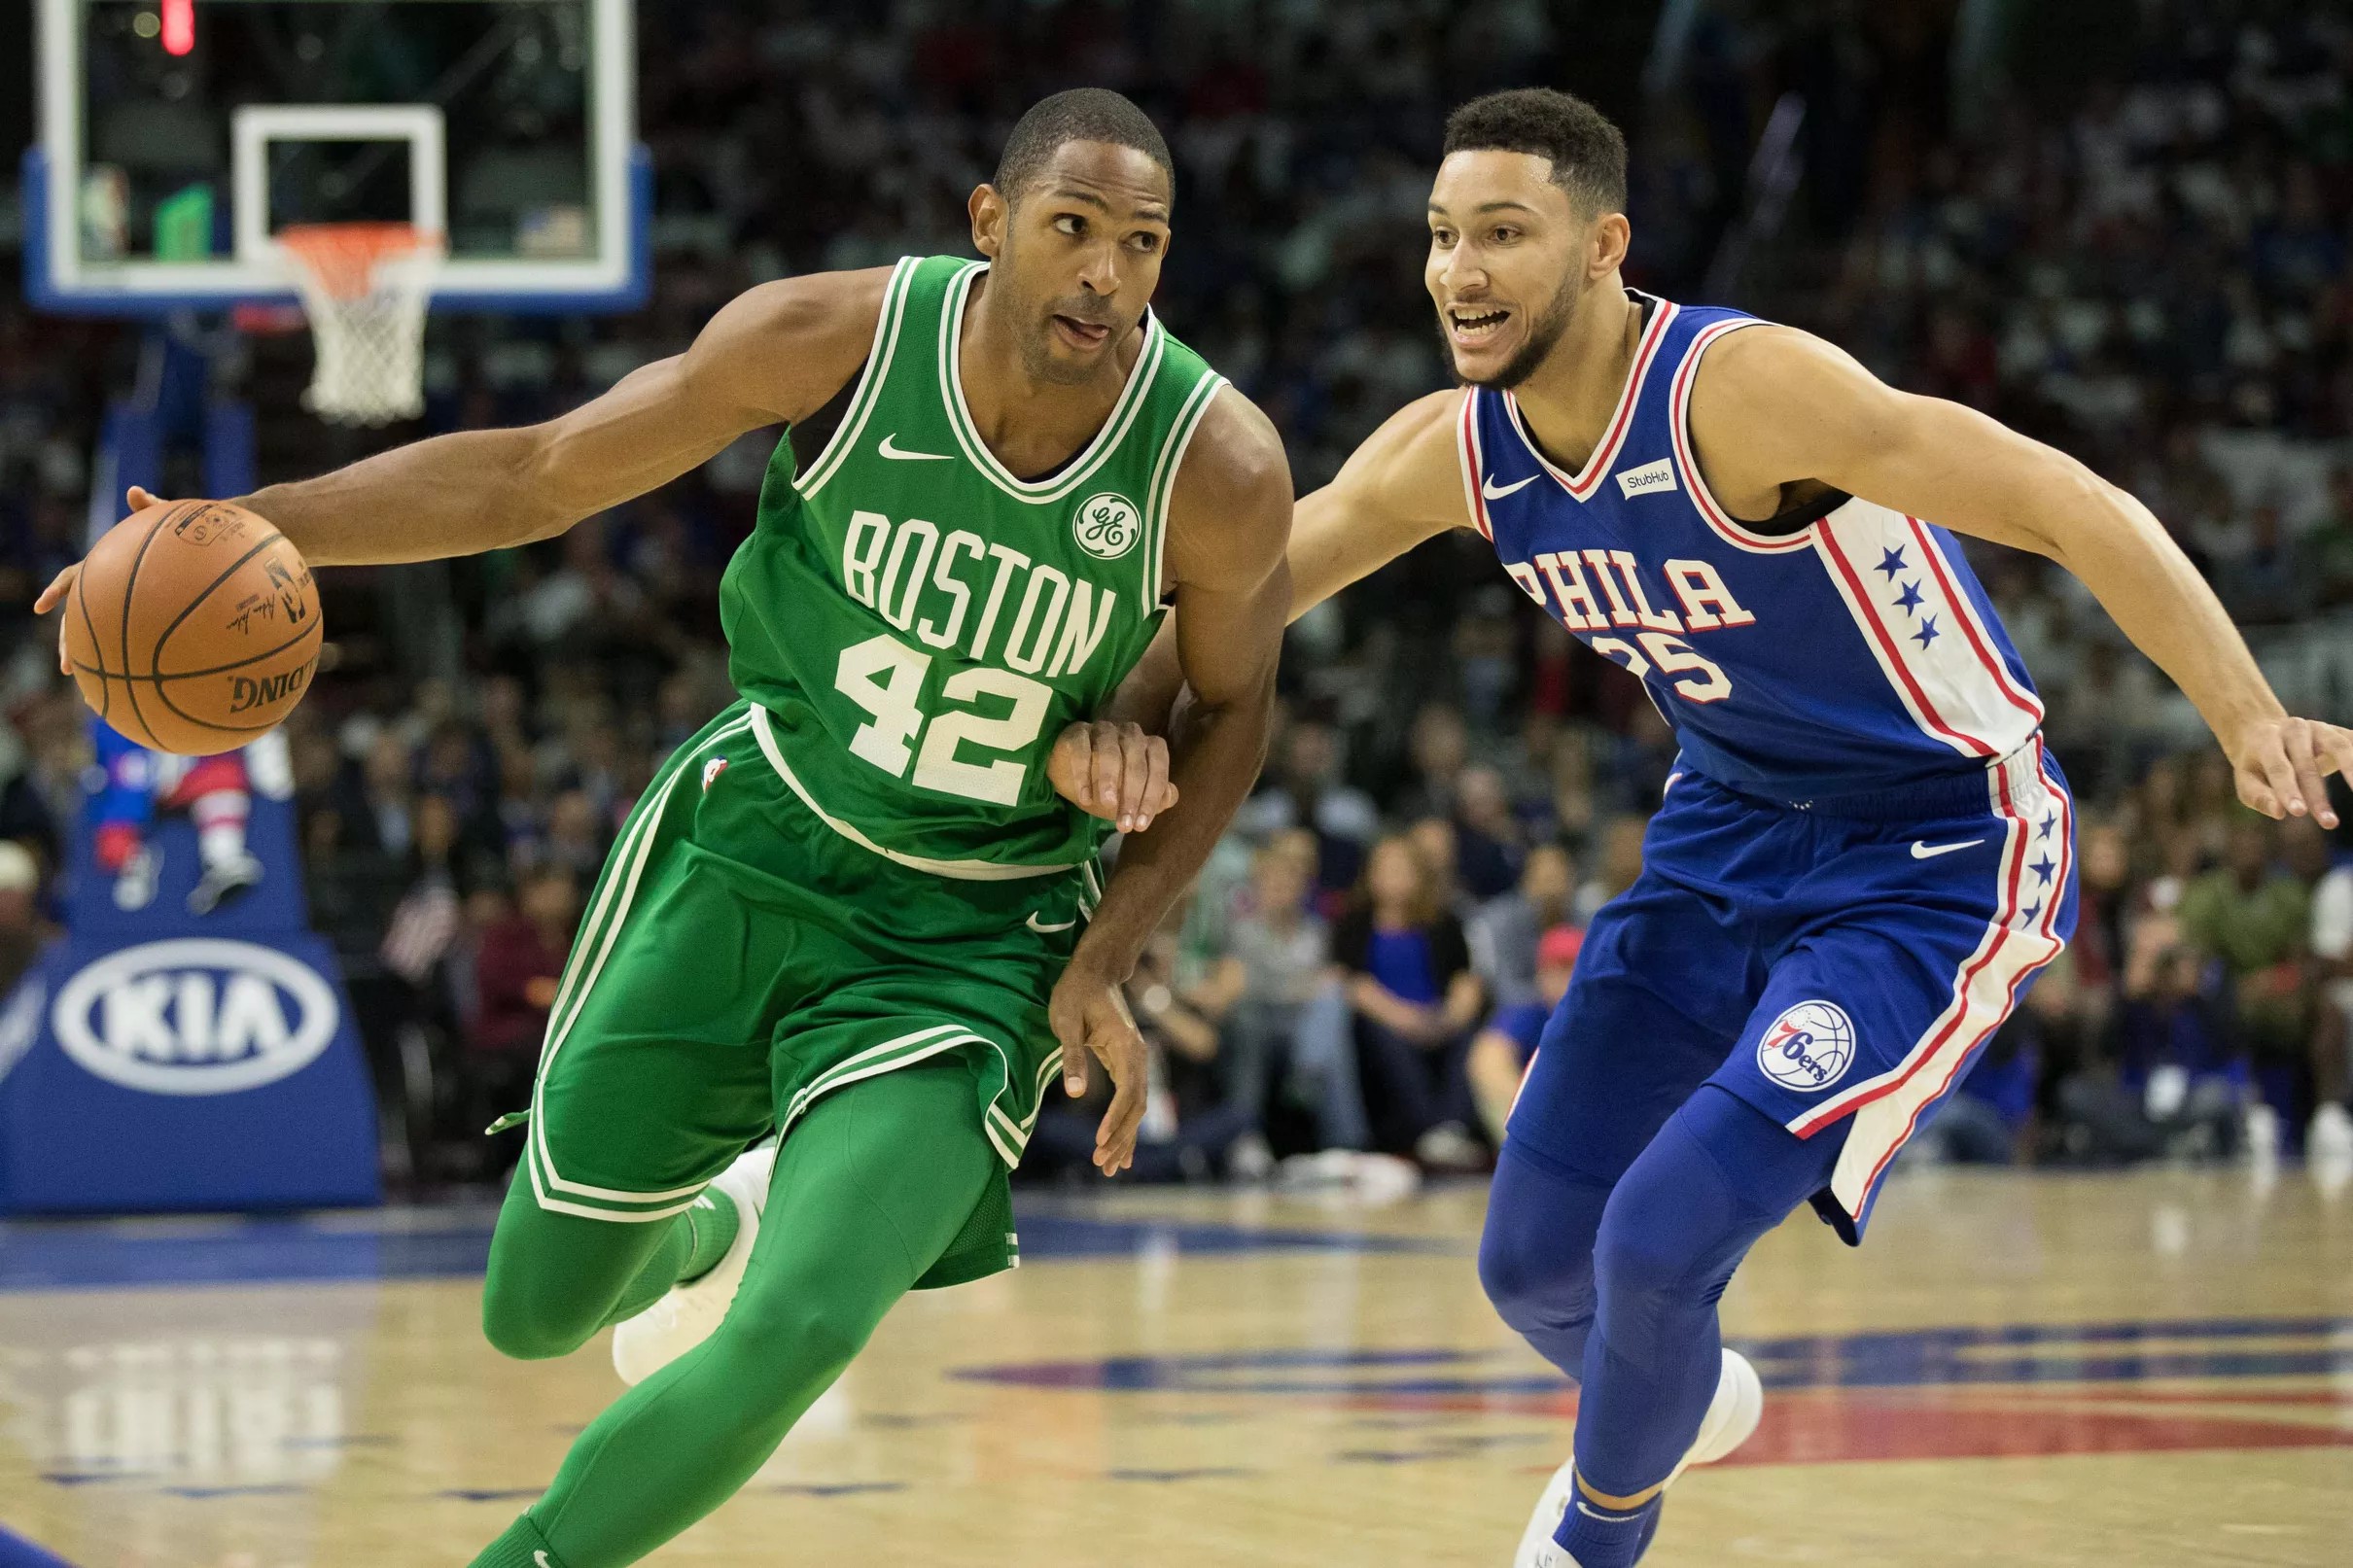 The Celtics host division rival Philadelphia 76ers for the second of 4